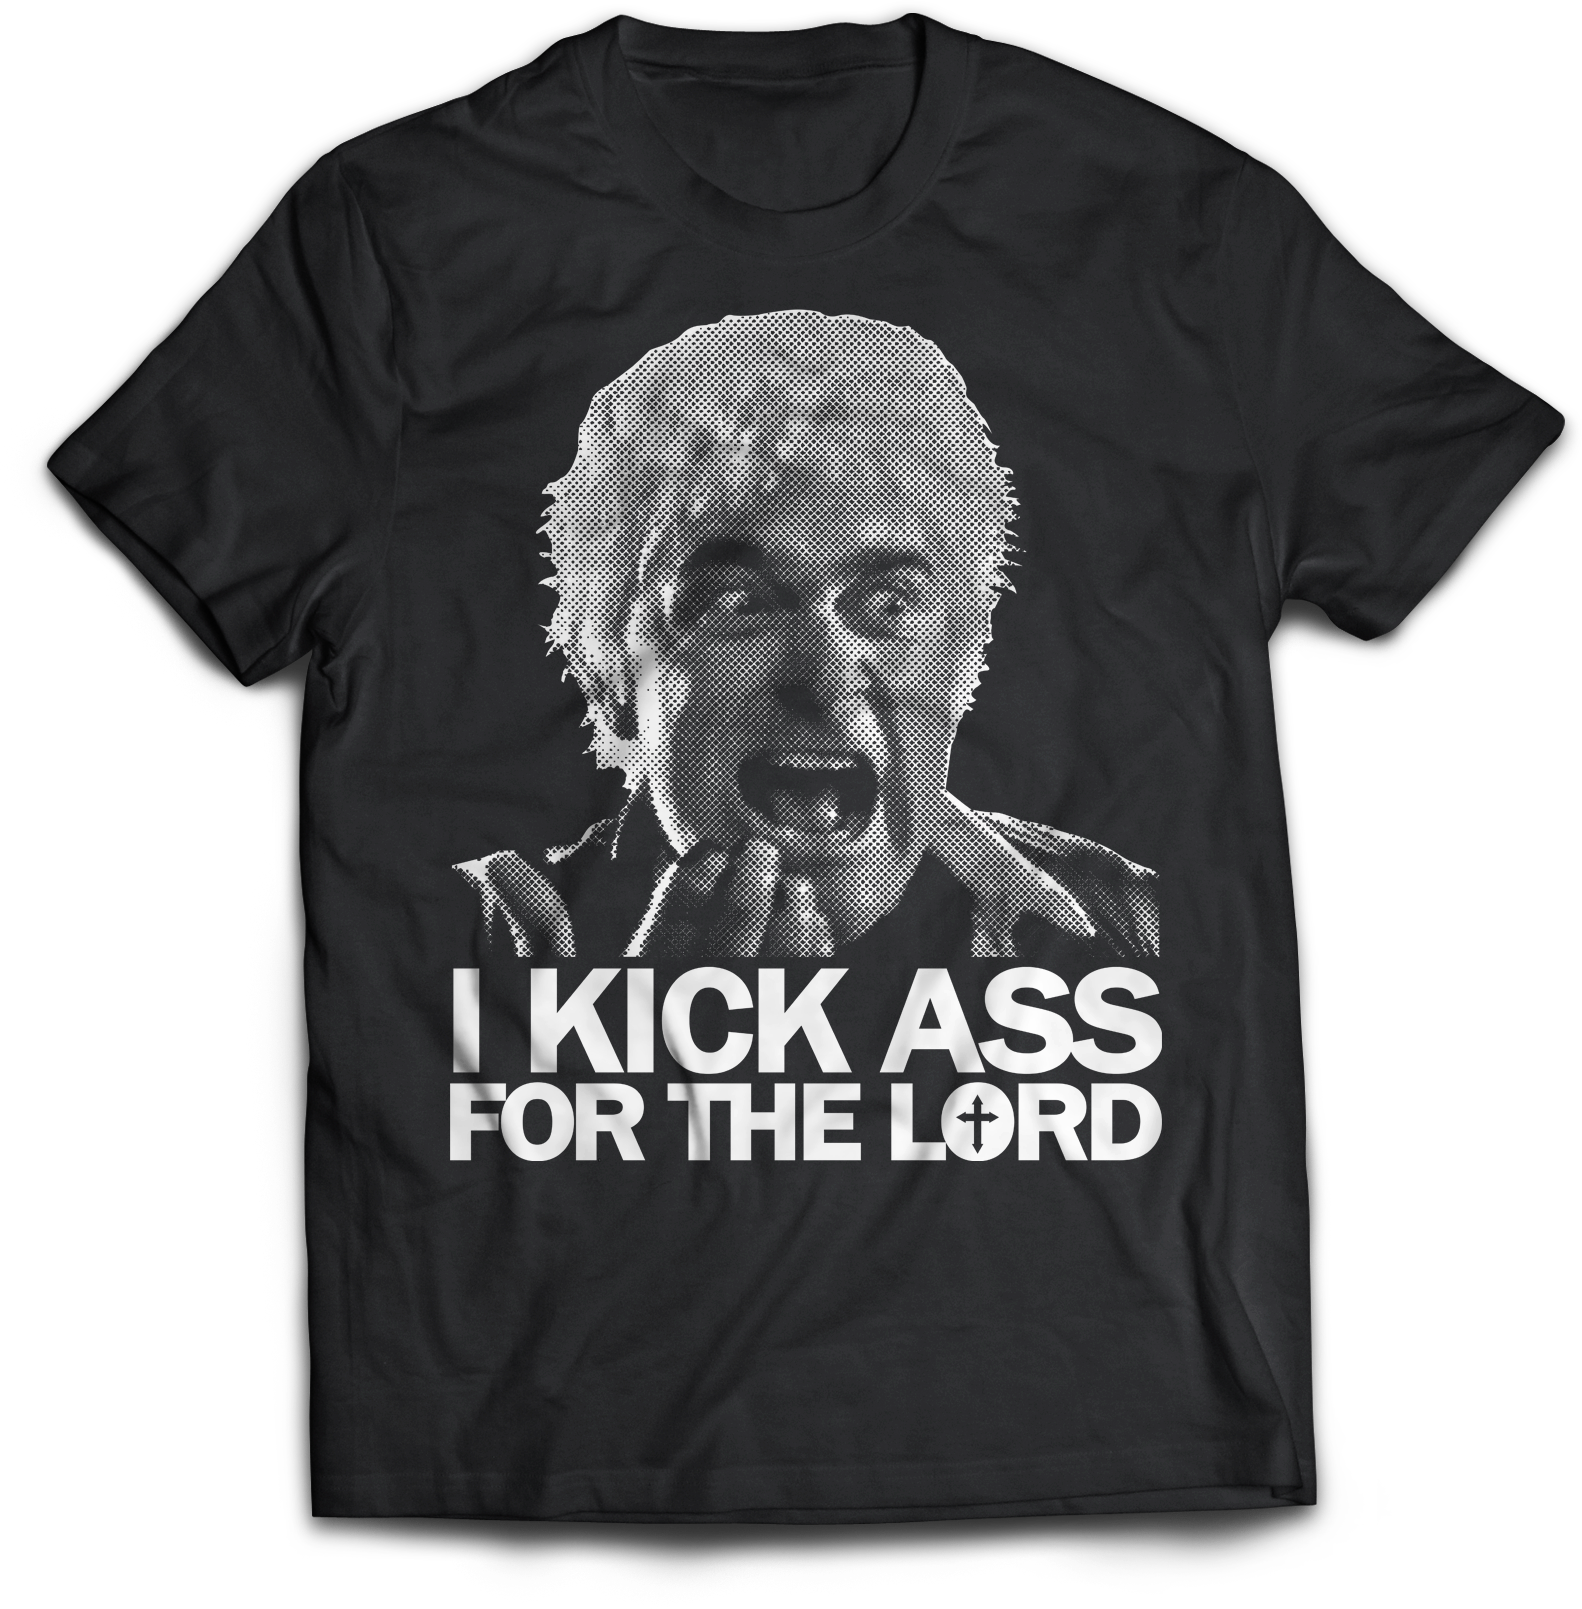 BRAINDEAD / DEAD ALIVE - FATHER MCGRUDER "I KICK ASS FOR THE LORD" T-SHIRT